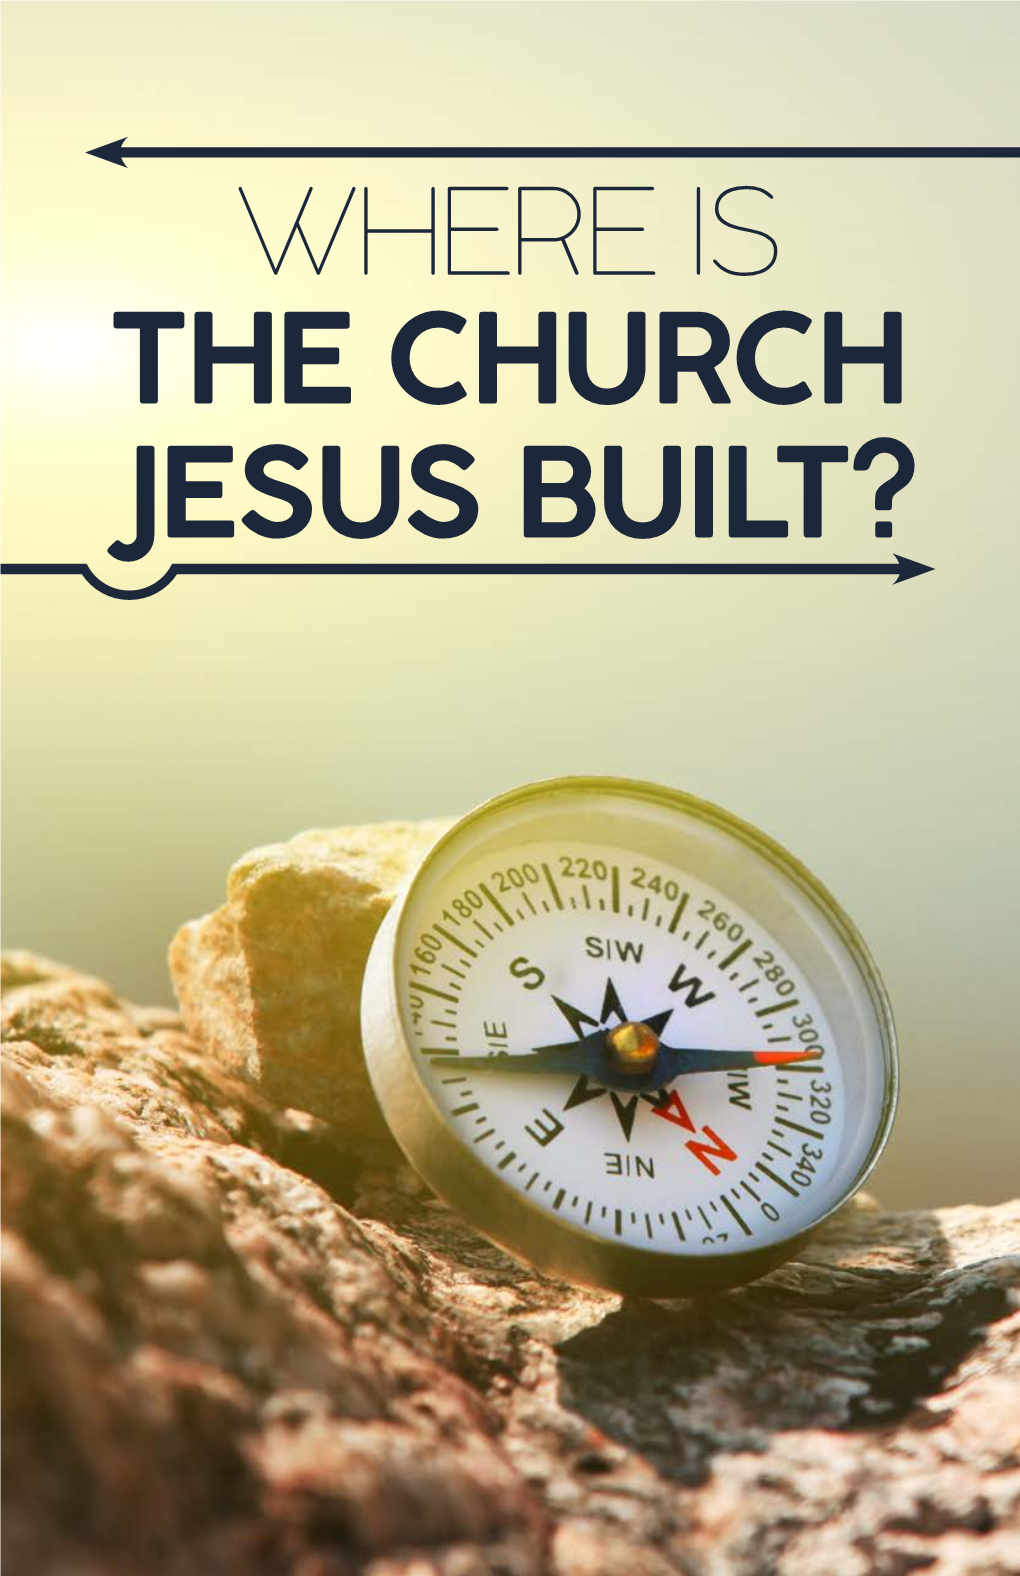 Were Is the Church Jesus Built?